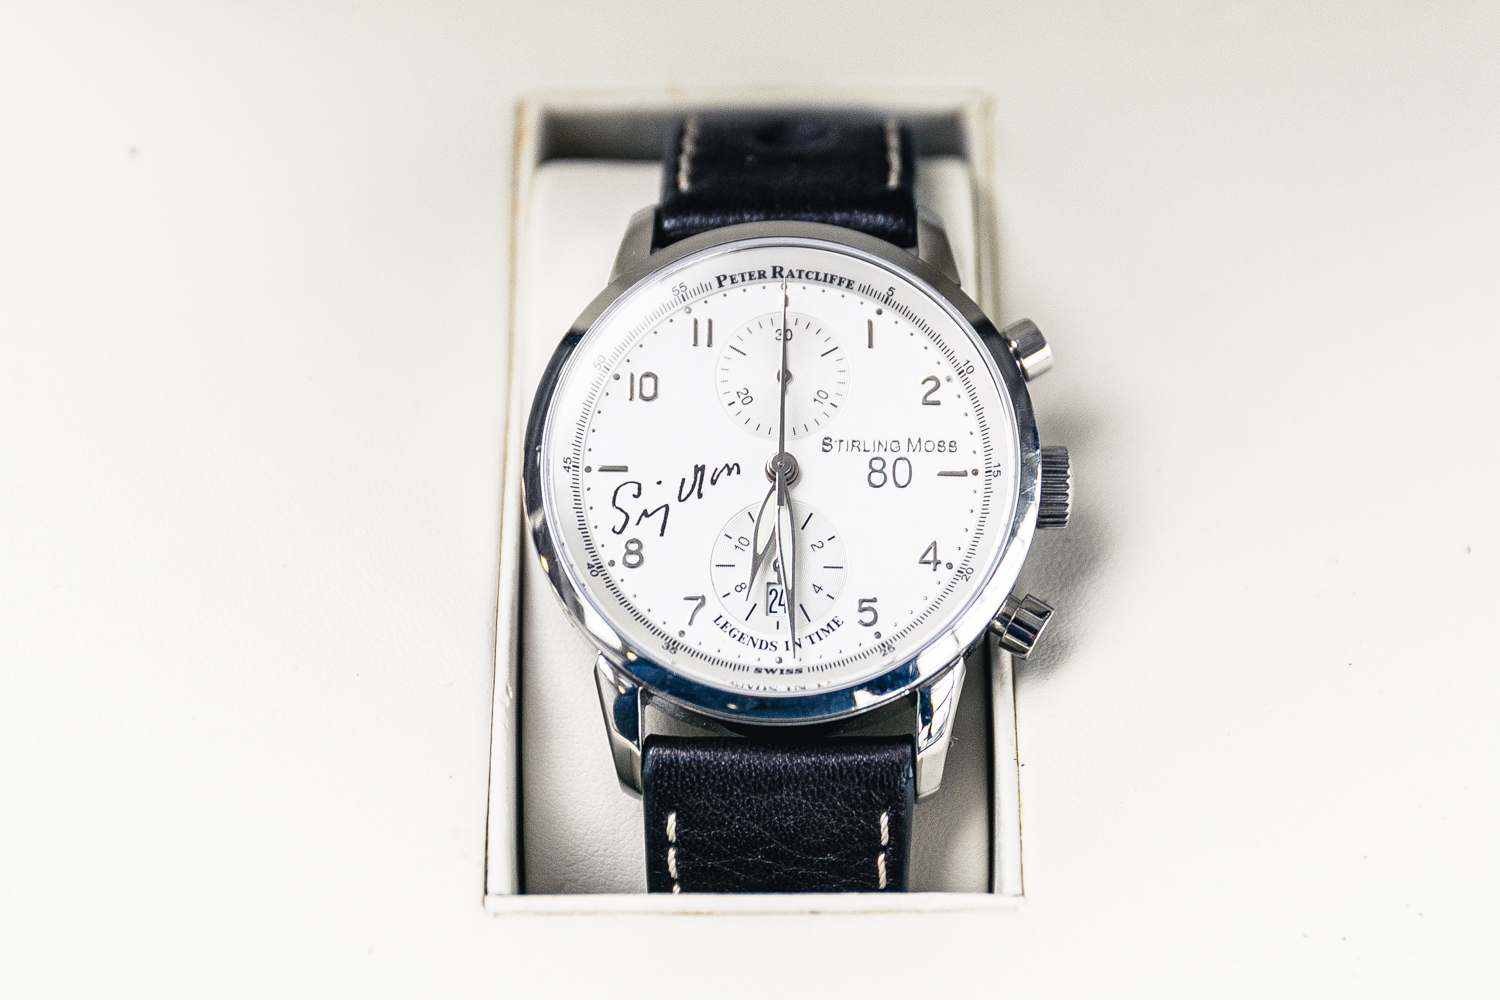 Stirling's personal 2011 Le Mans watch